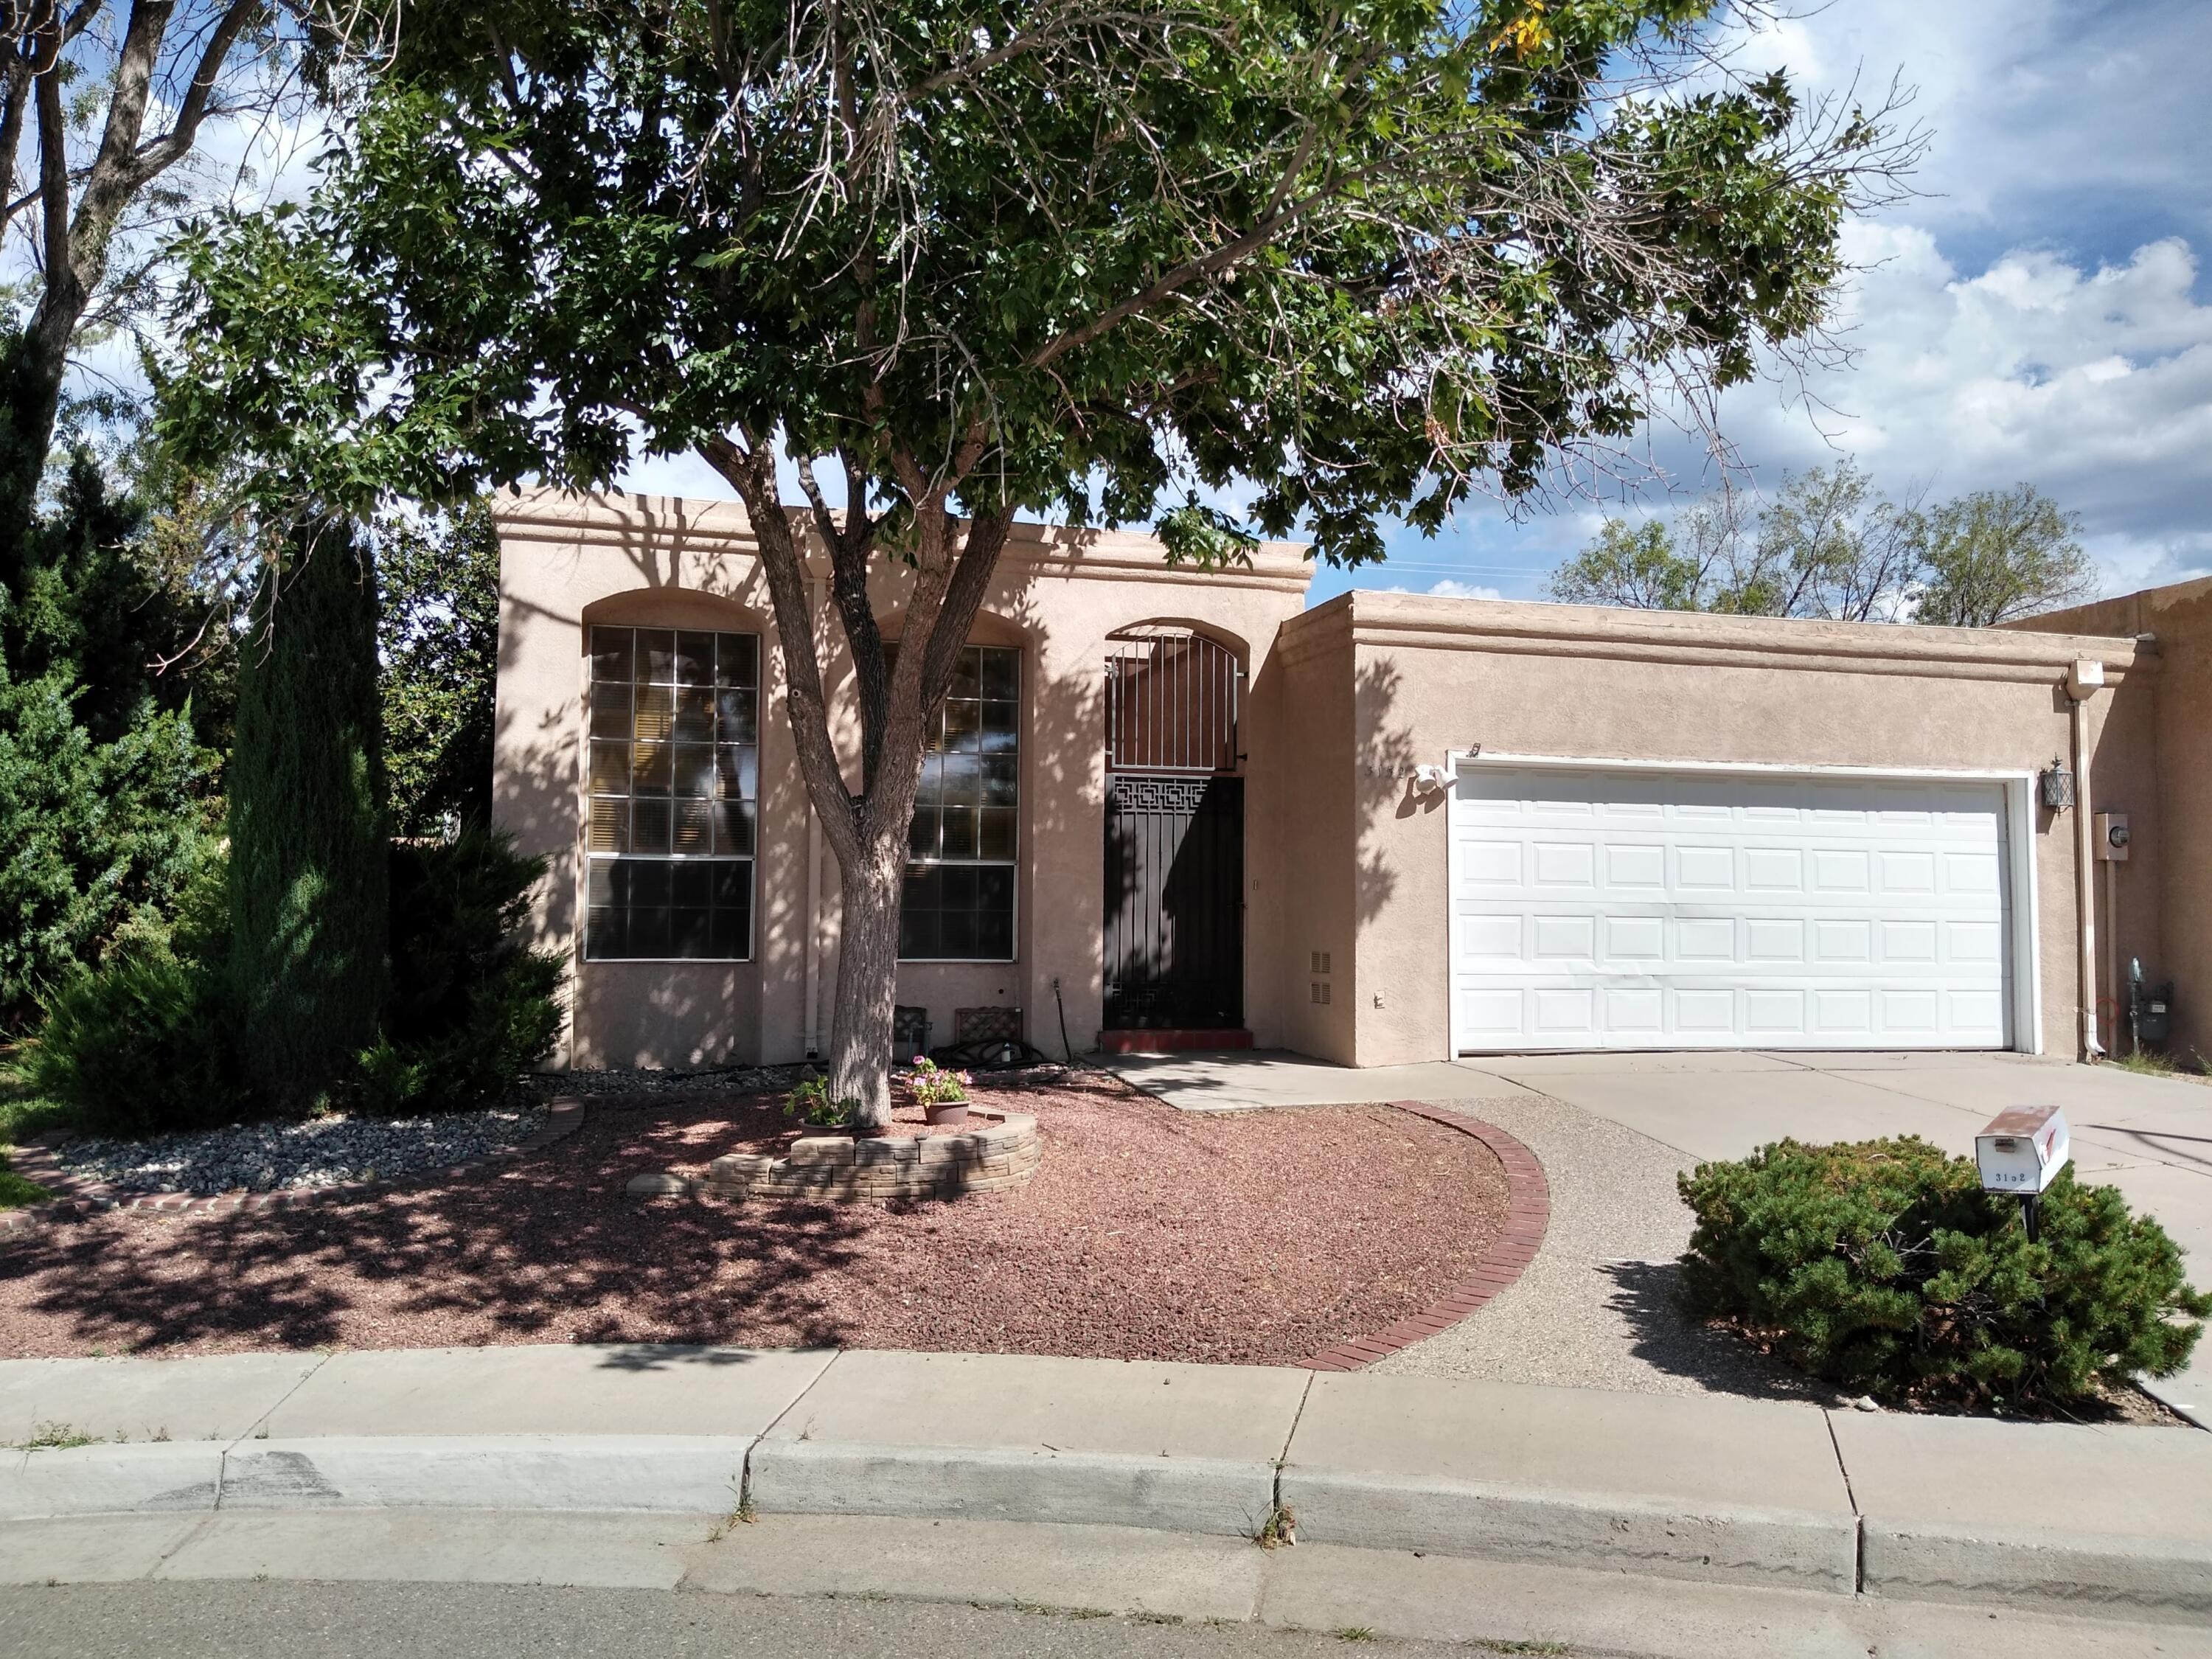 This beautiful Mossman townhome lies just minutes from Albuquerque Uptown!  It is a great floorplan with plenty of natural light & features raised ceilings that really make it feel open & airy!  It has a 3 bedroom layout, with one currently being used as an office.  The kitchen is large with plenty of cabinets & countertop space.  It also has a great breakfast nook area.  All of the appliances convey with this home, which includes the washer & dryer.  The backyard offers a great covered patio & plenty of open patio, making it a perfect place to enjoy the wonderful weather. The roof is less than 2 years old, the water heater is less than 1 year old, & the heater/refrigerated air combo unit was added approximately 6 years ago. The home is being sold in as-is condition.